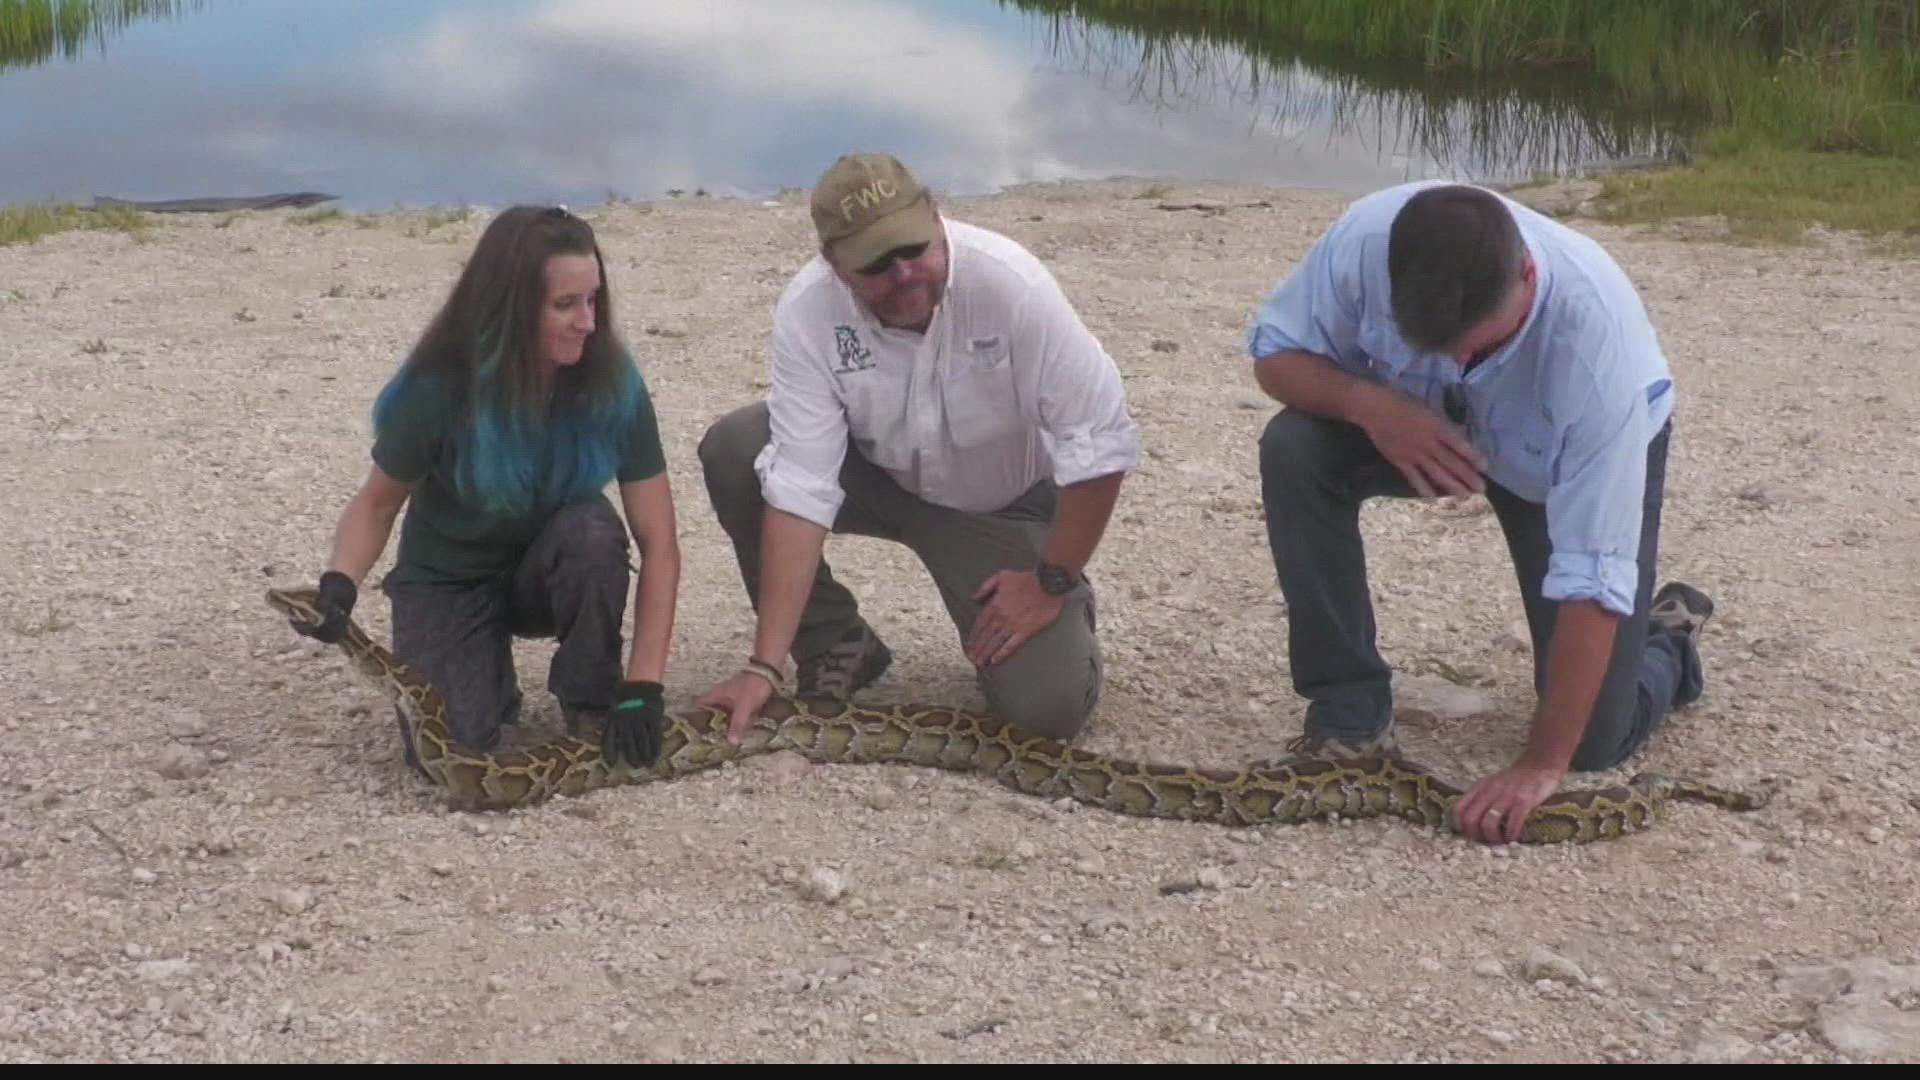 The competition to remove invasive Burmese pythons from the Everglades is underway.